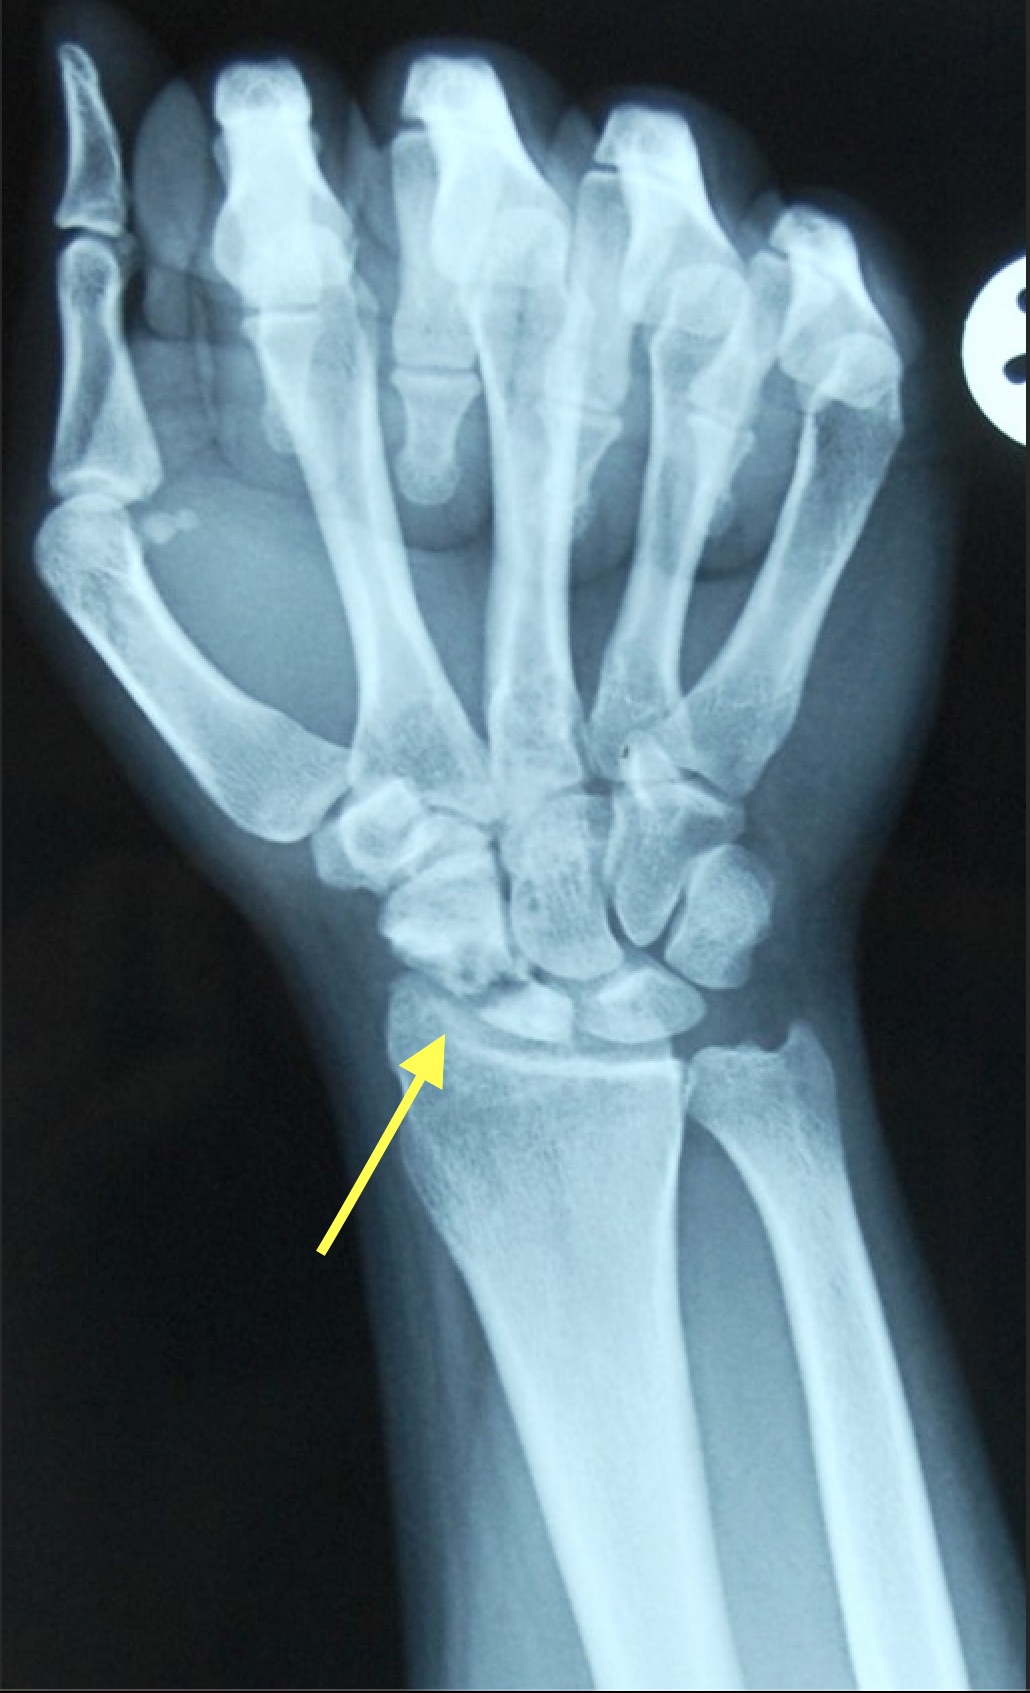 Postmortem radiography scaphoid fracture